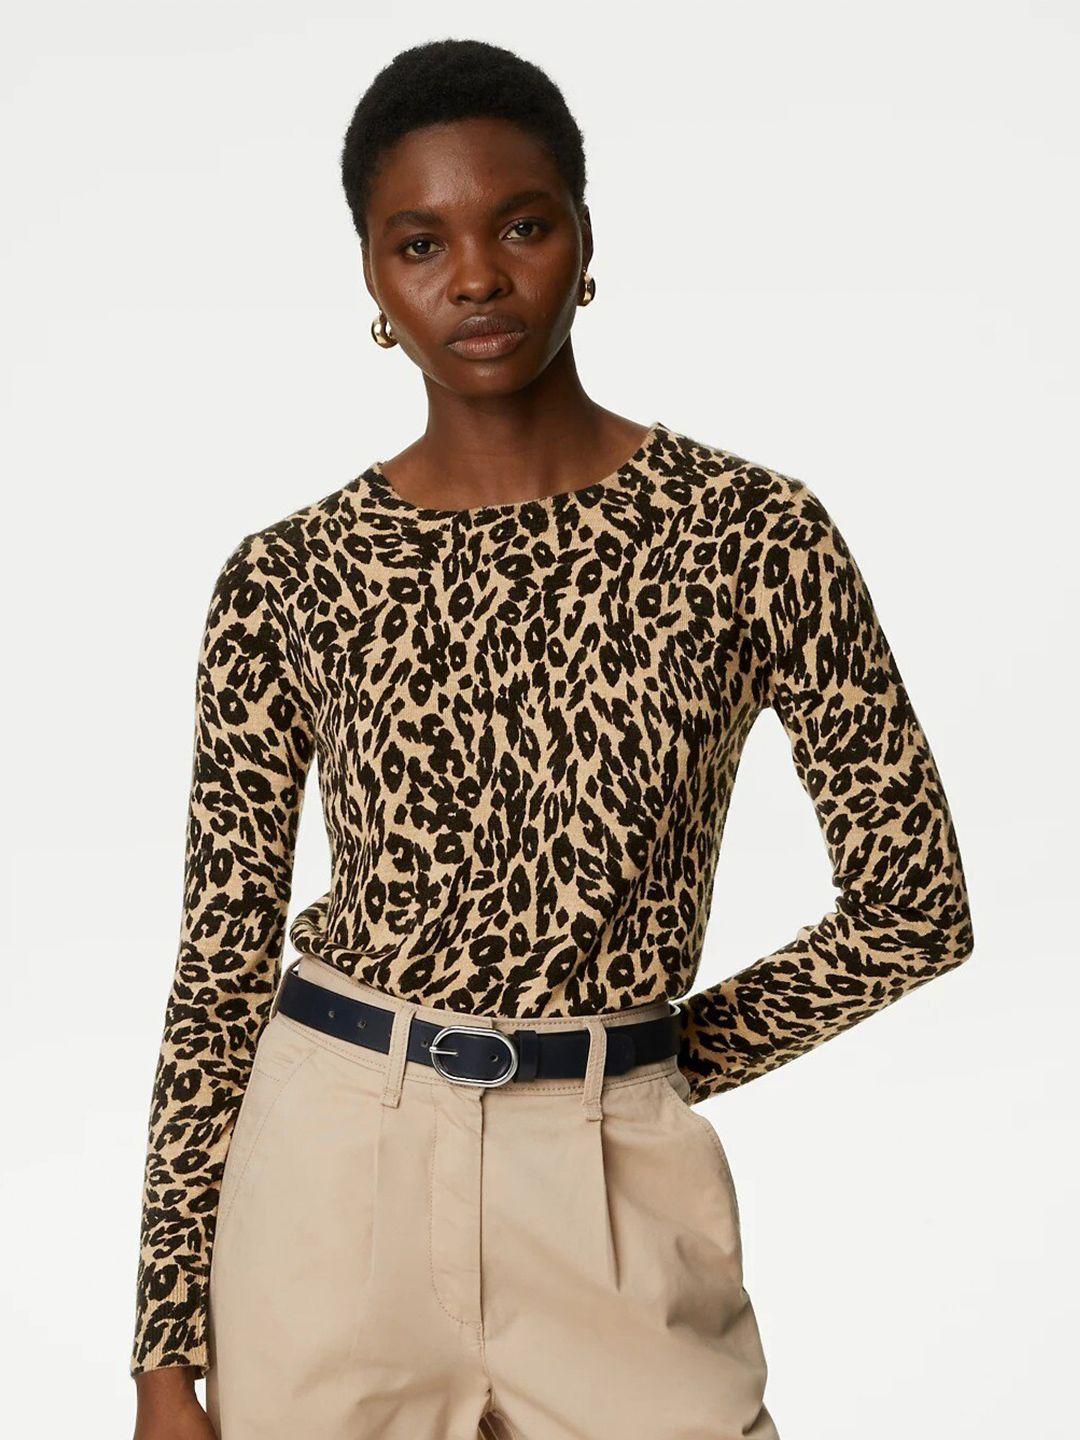 marks & spencer animal printed long sleeves pullover sweaters